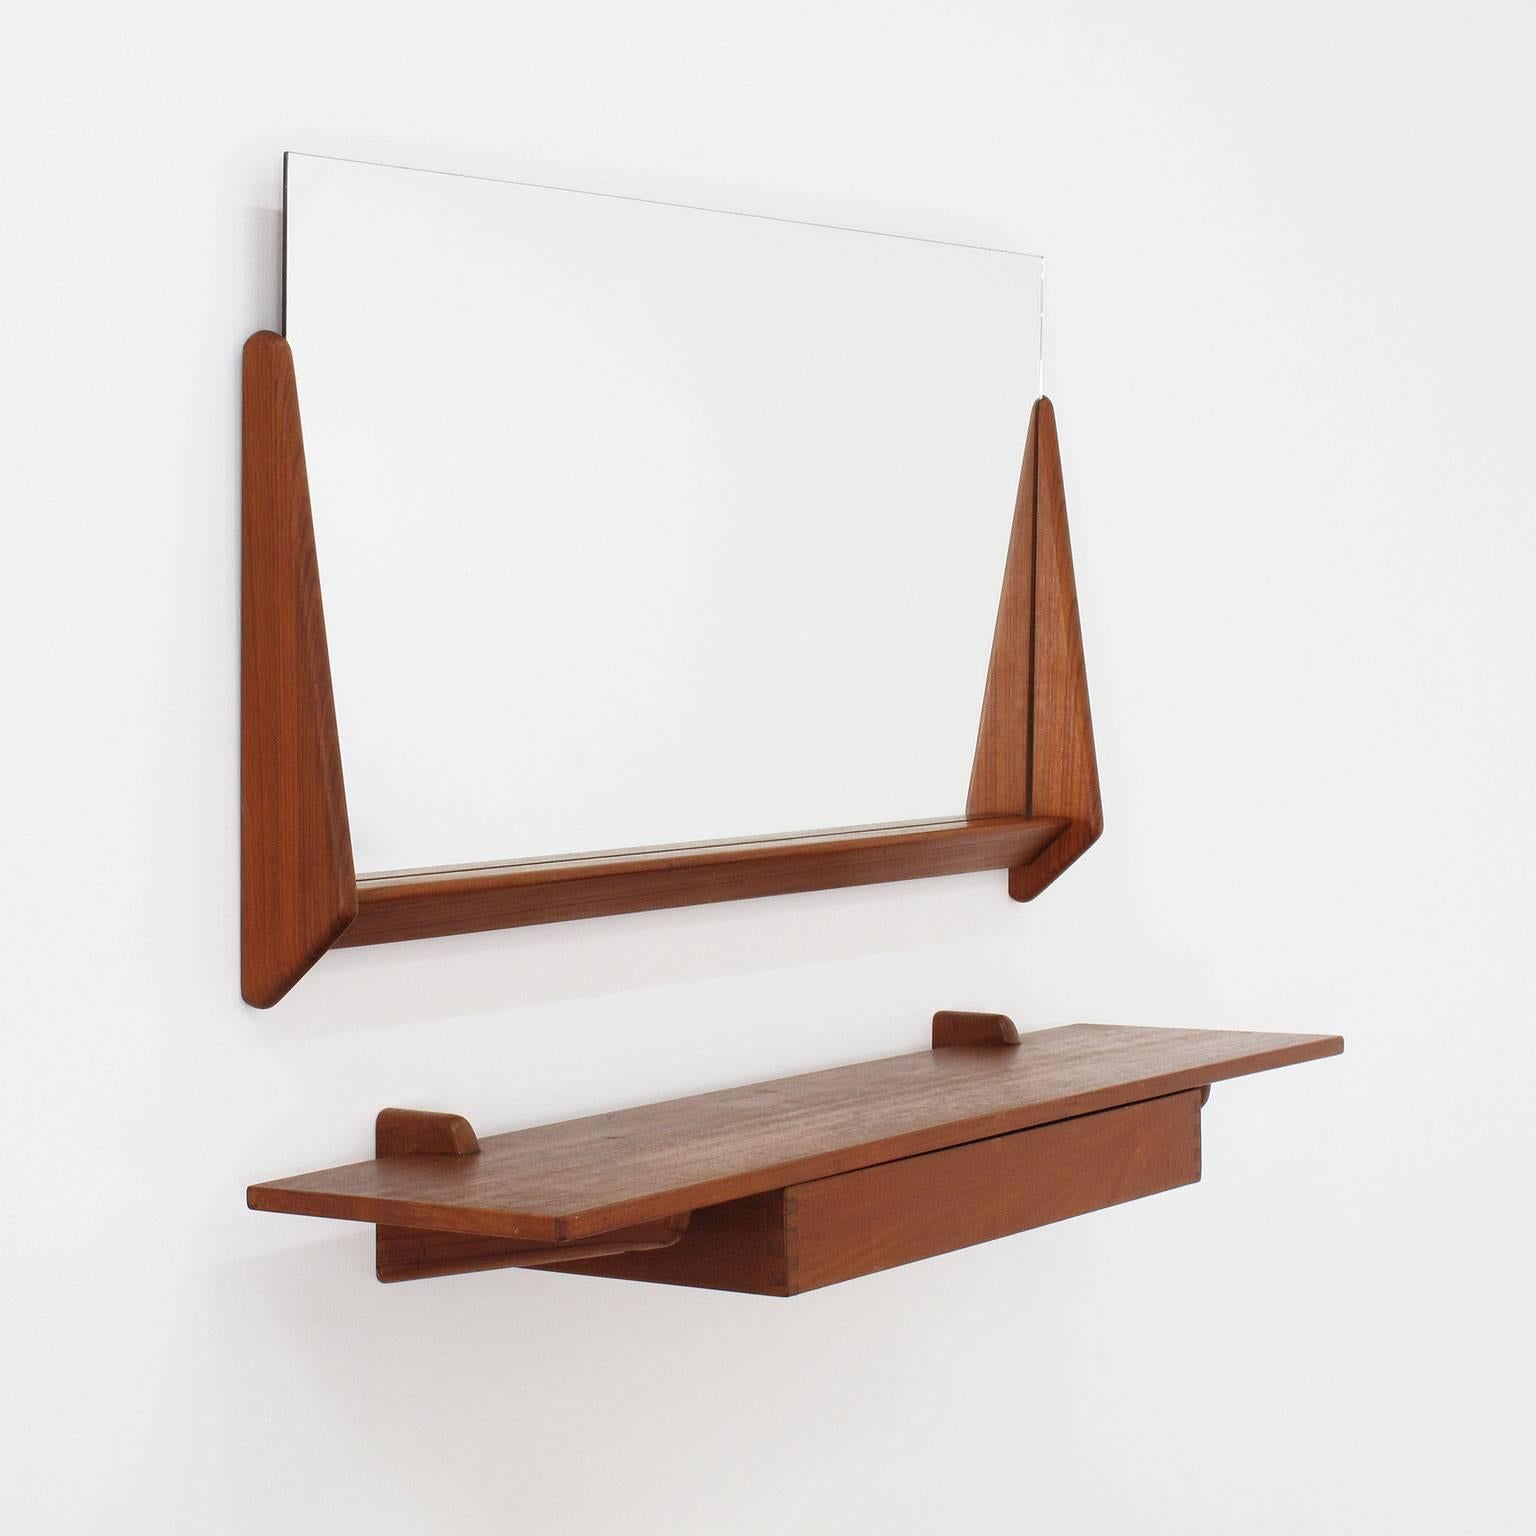 Aksel Kjersgaard
Designed wall mirror and floating shelf
Solid teak, made in Denmark
Odder, 1960s
Dimensions of mirror and frame in inches: 18 high x 32.38 wide x 3 deep
Dimensions of mirror alone in inches: 15.5 high x 31.5 wide
Dimensions of